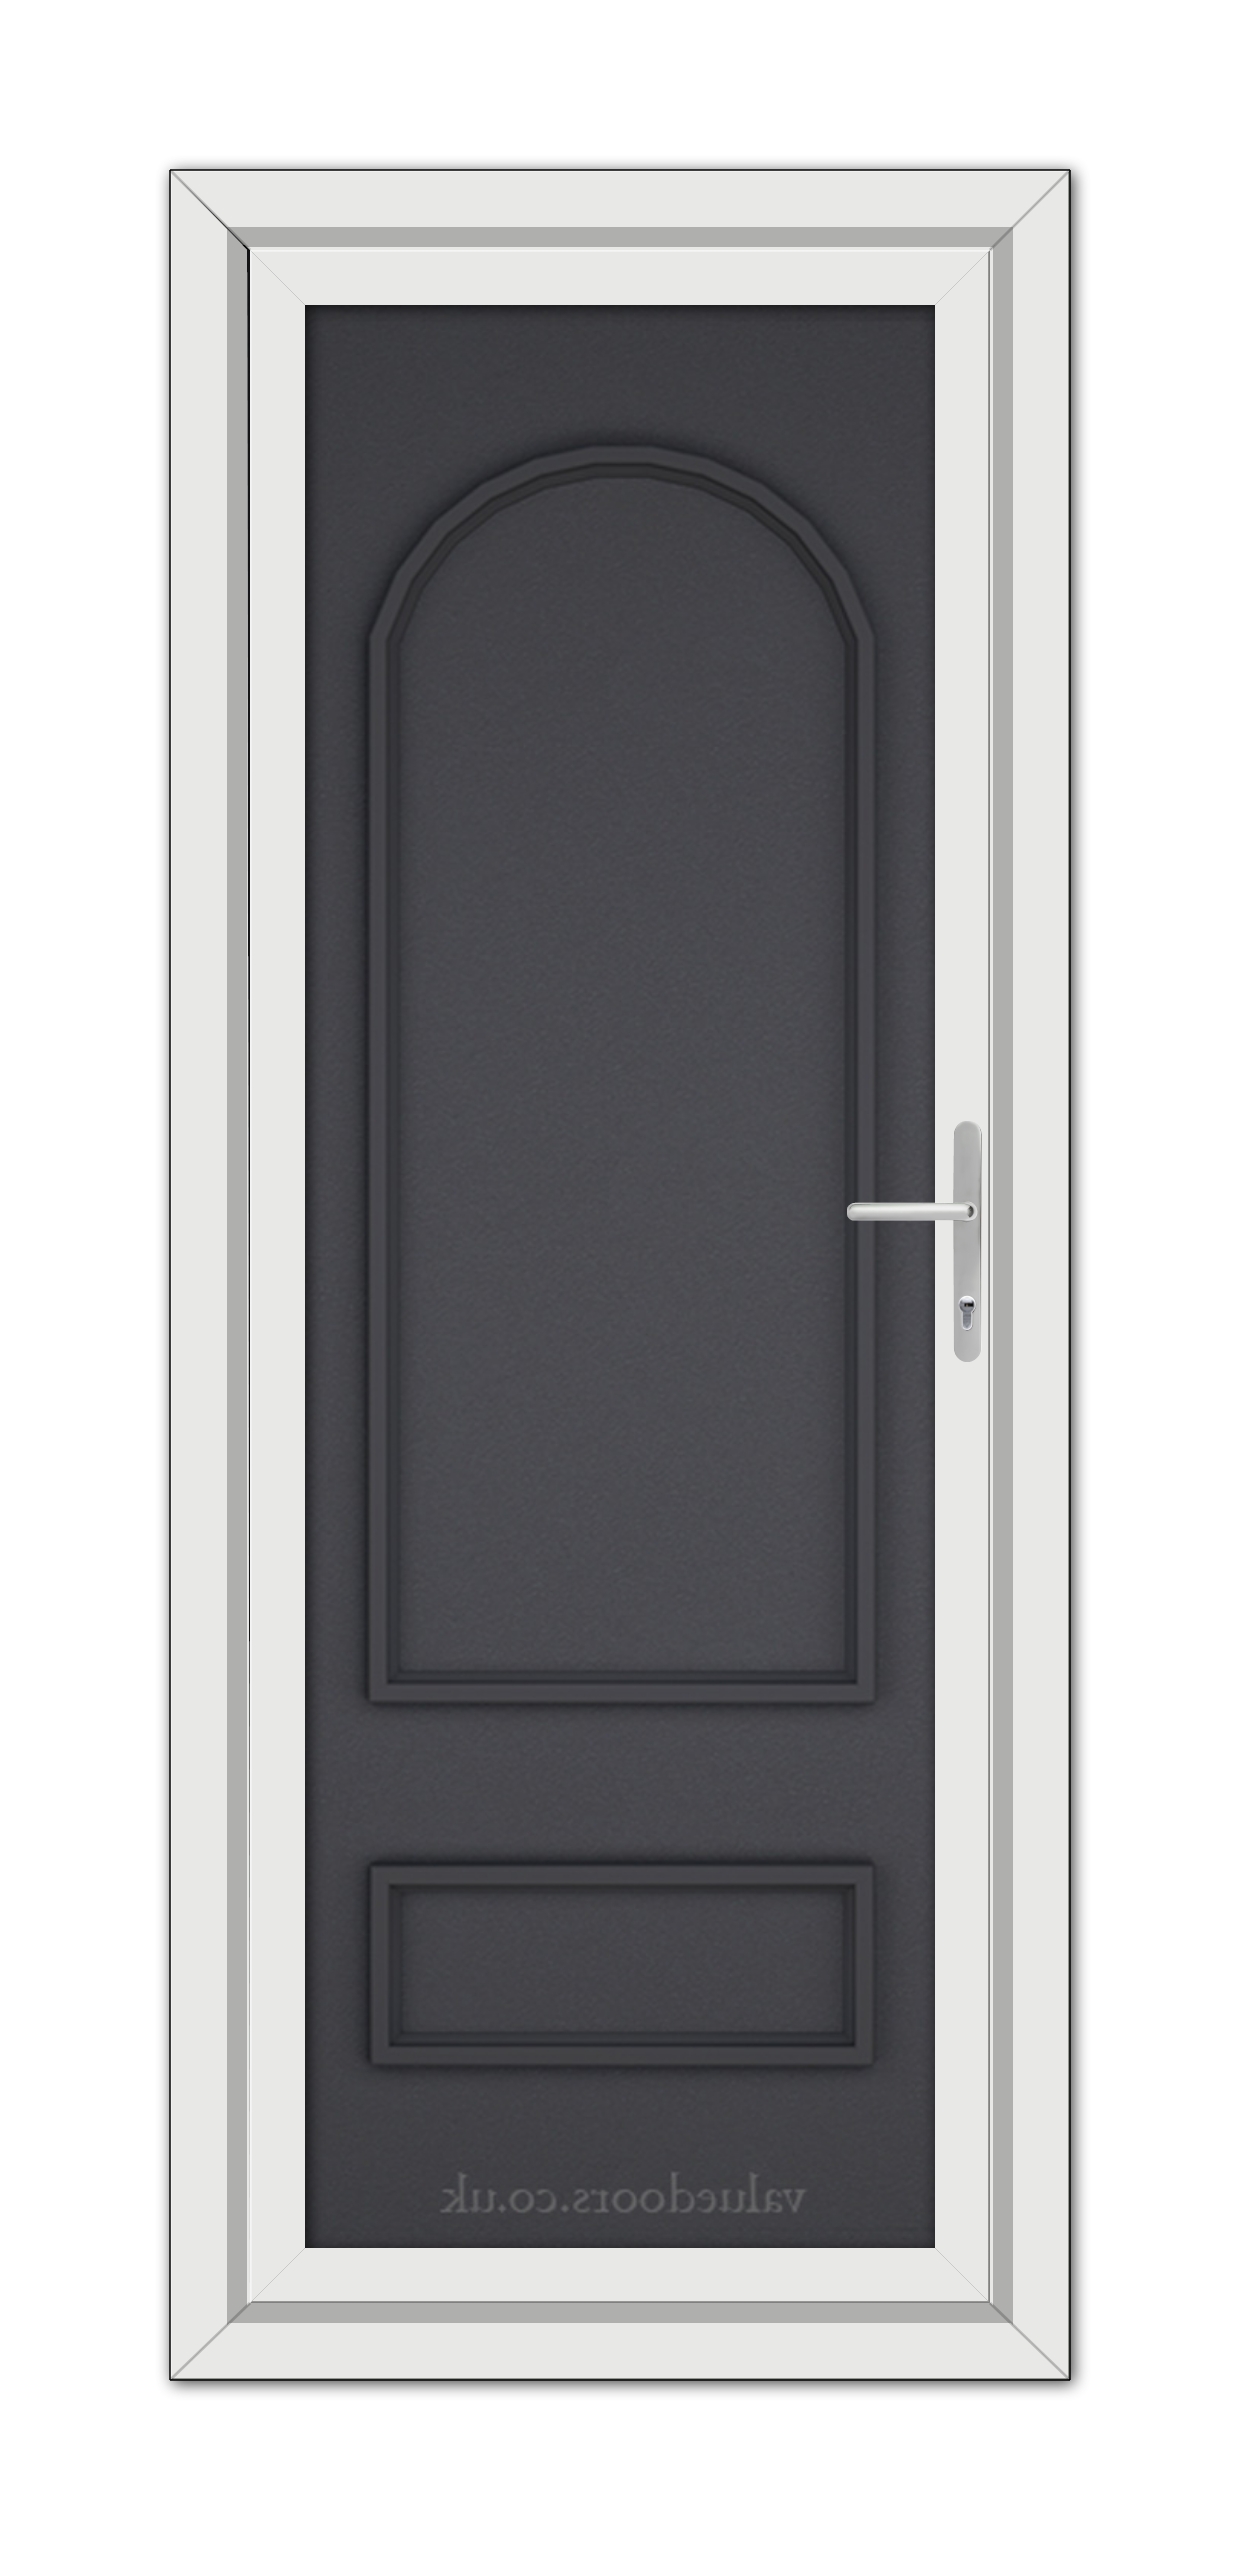 A vertical image of a Grey Grained Canterbury Solid uPVC Door with a white frame and a silver handle on the right side.